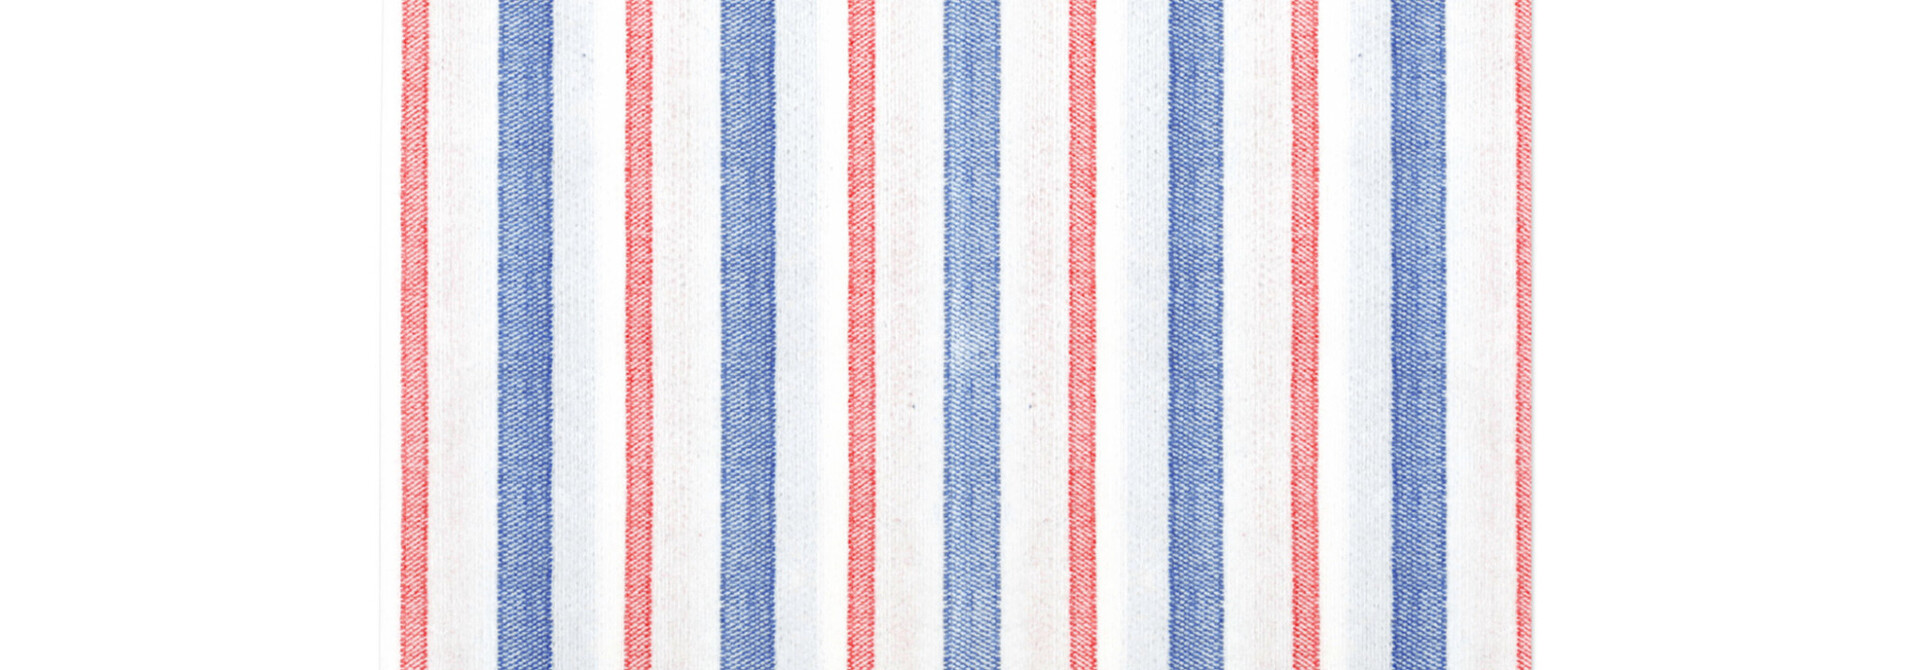 Americana Stripe | The Papersoft Dinner Napkin Collection Pack of 20, Multi